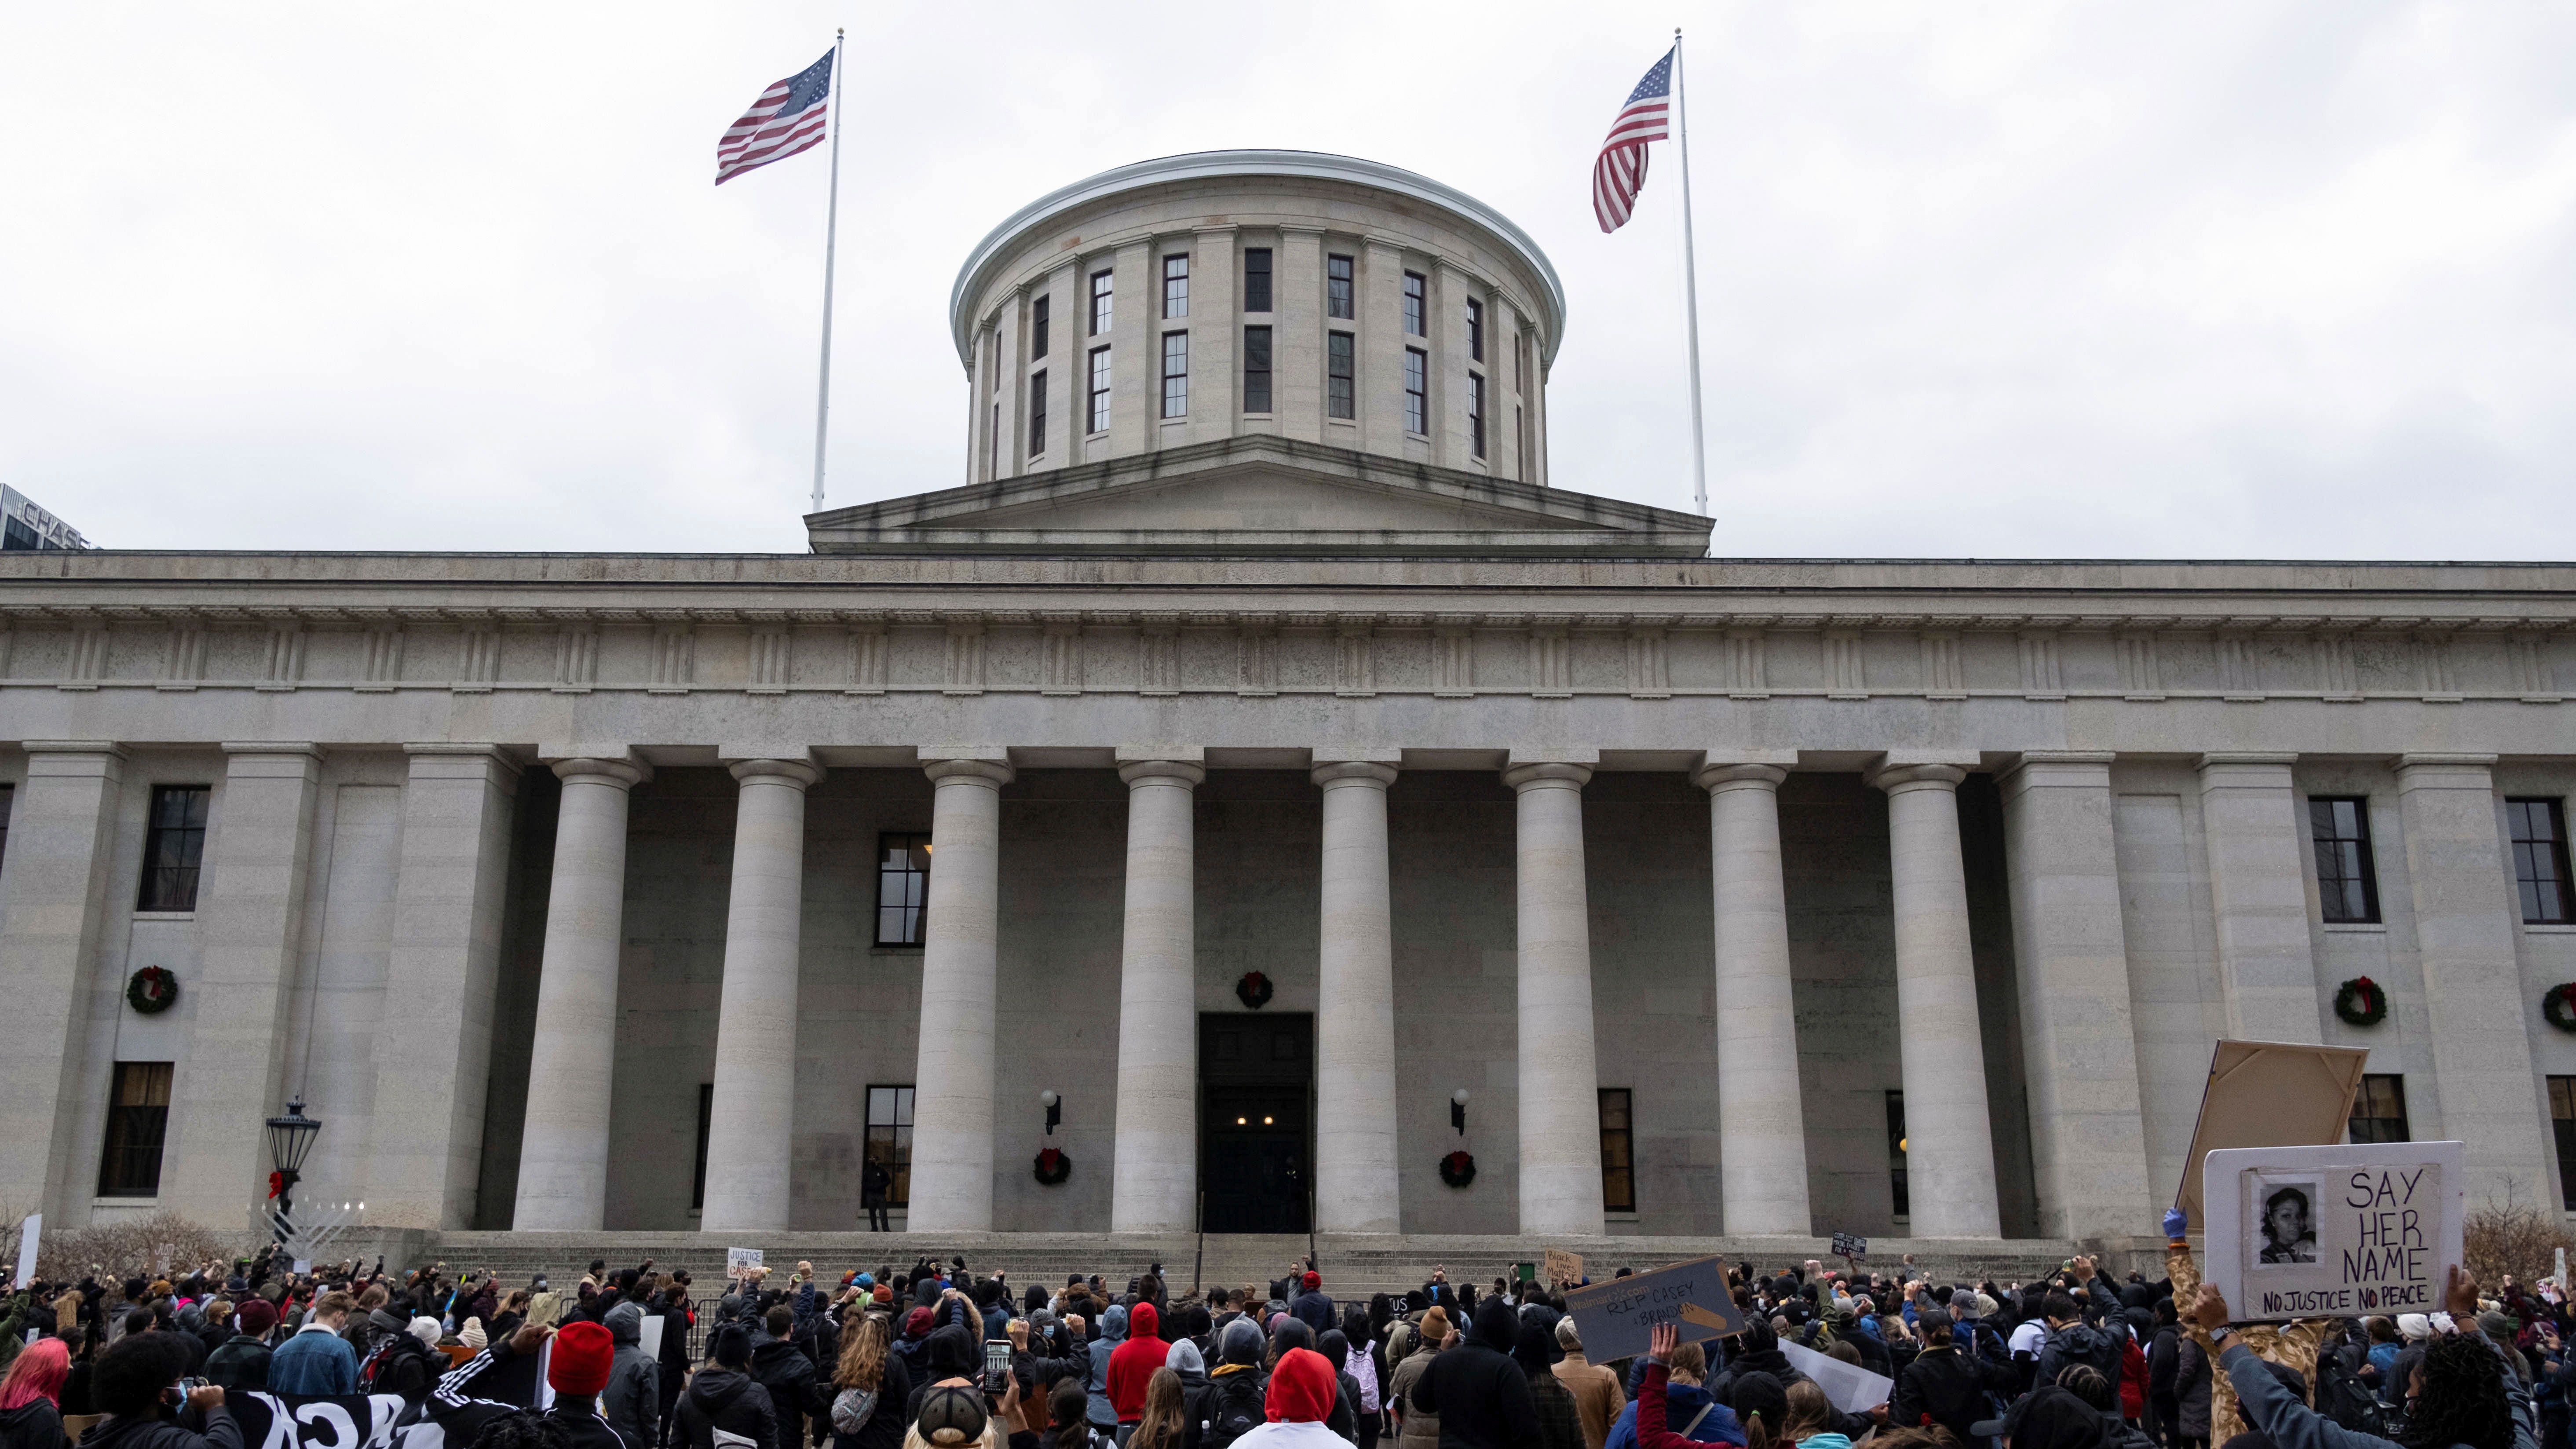 Protests at Ohio Statehouse